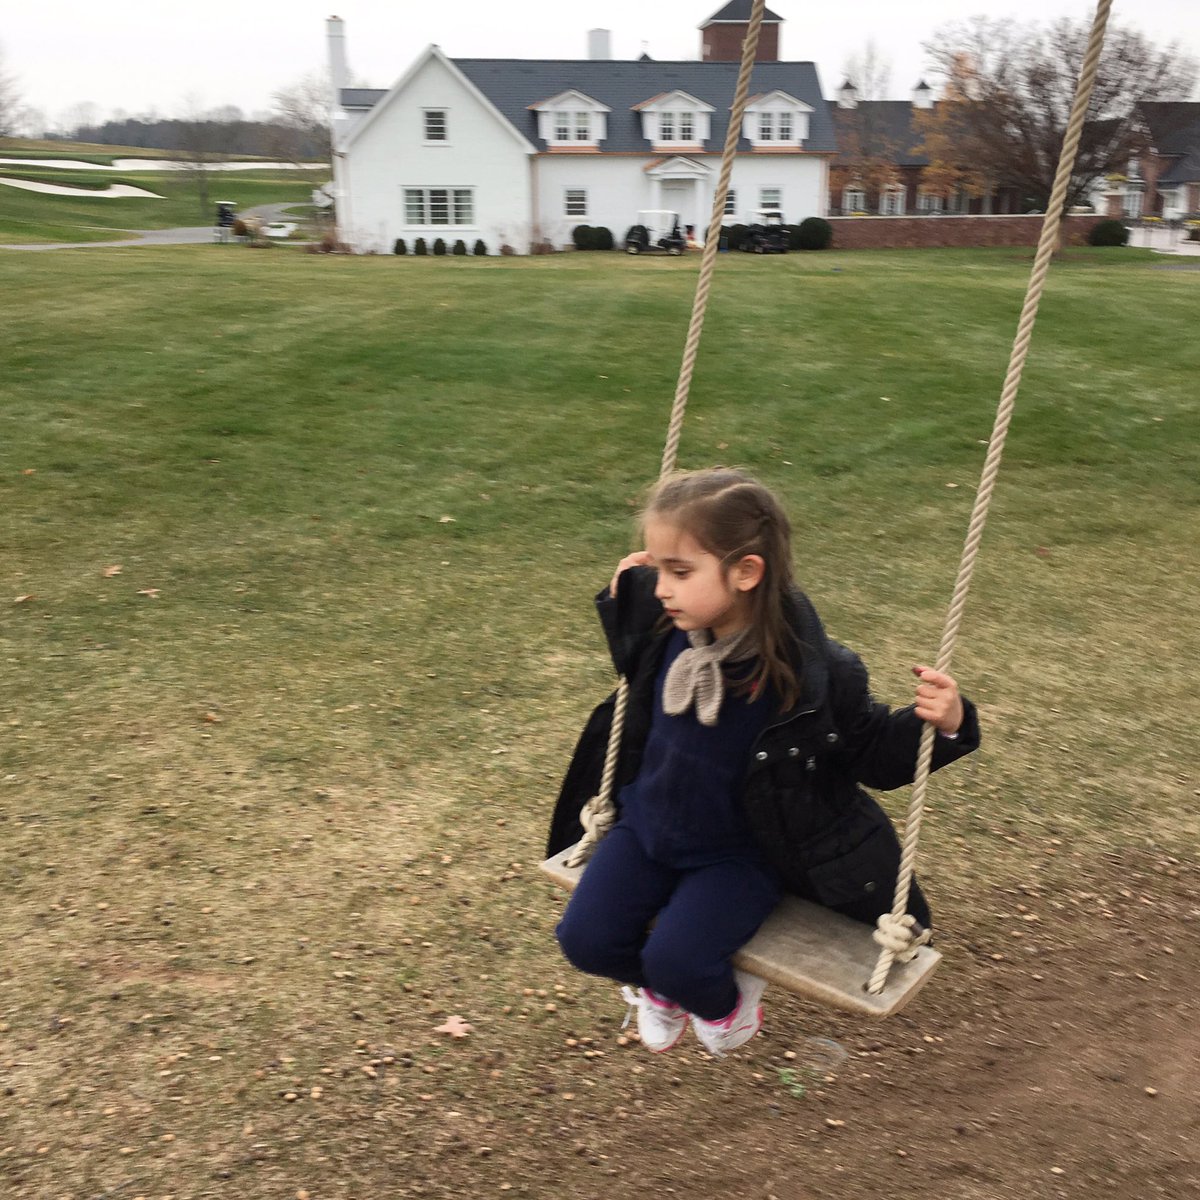 Swinging into the weekend #thanksgiving https://t.co/WOcZVtpyTY